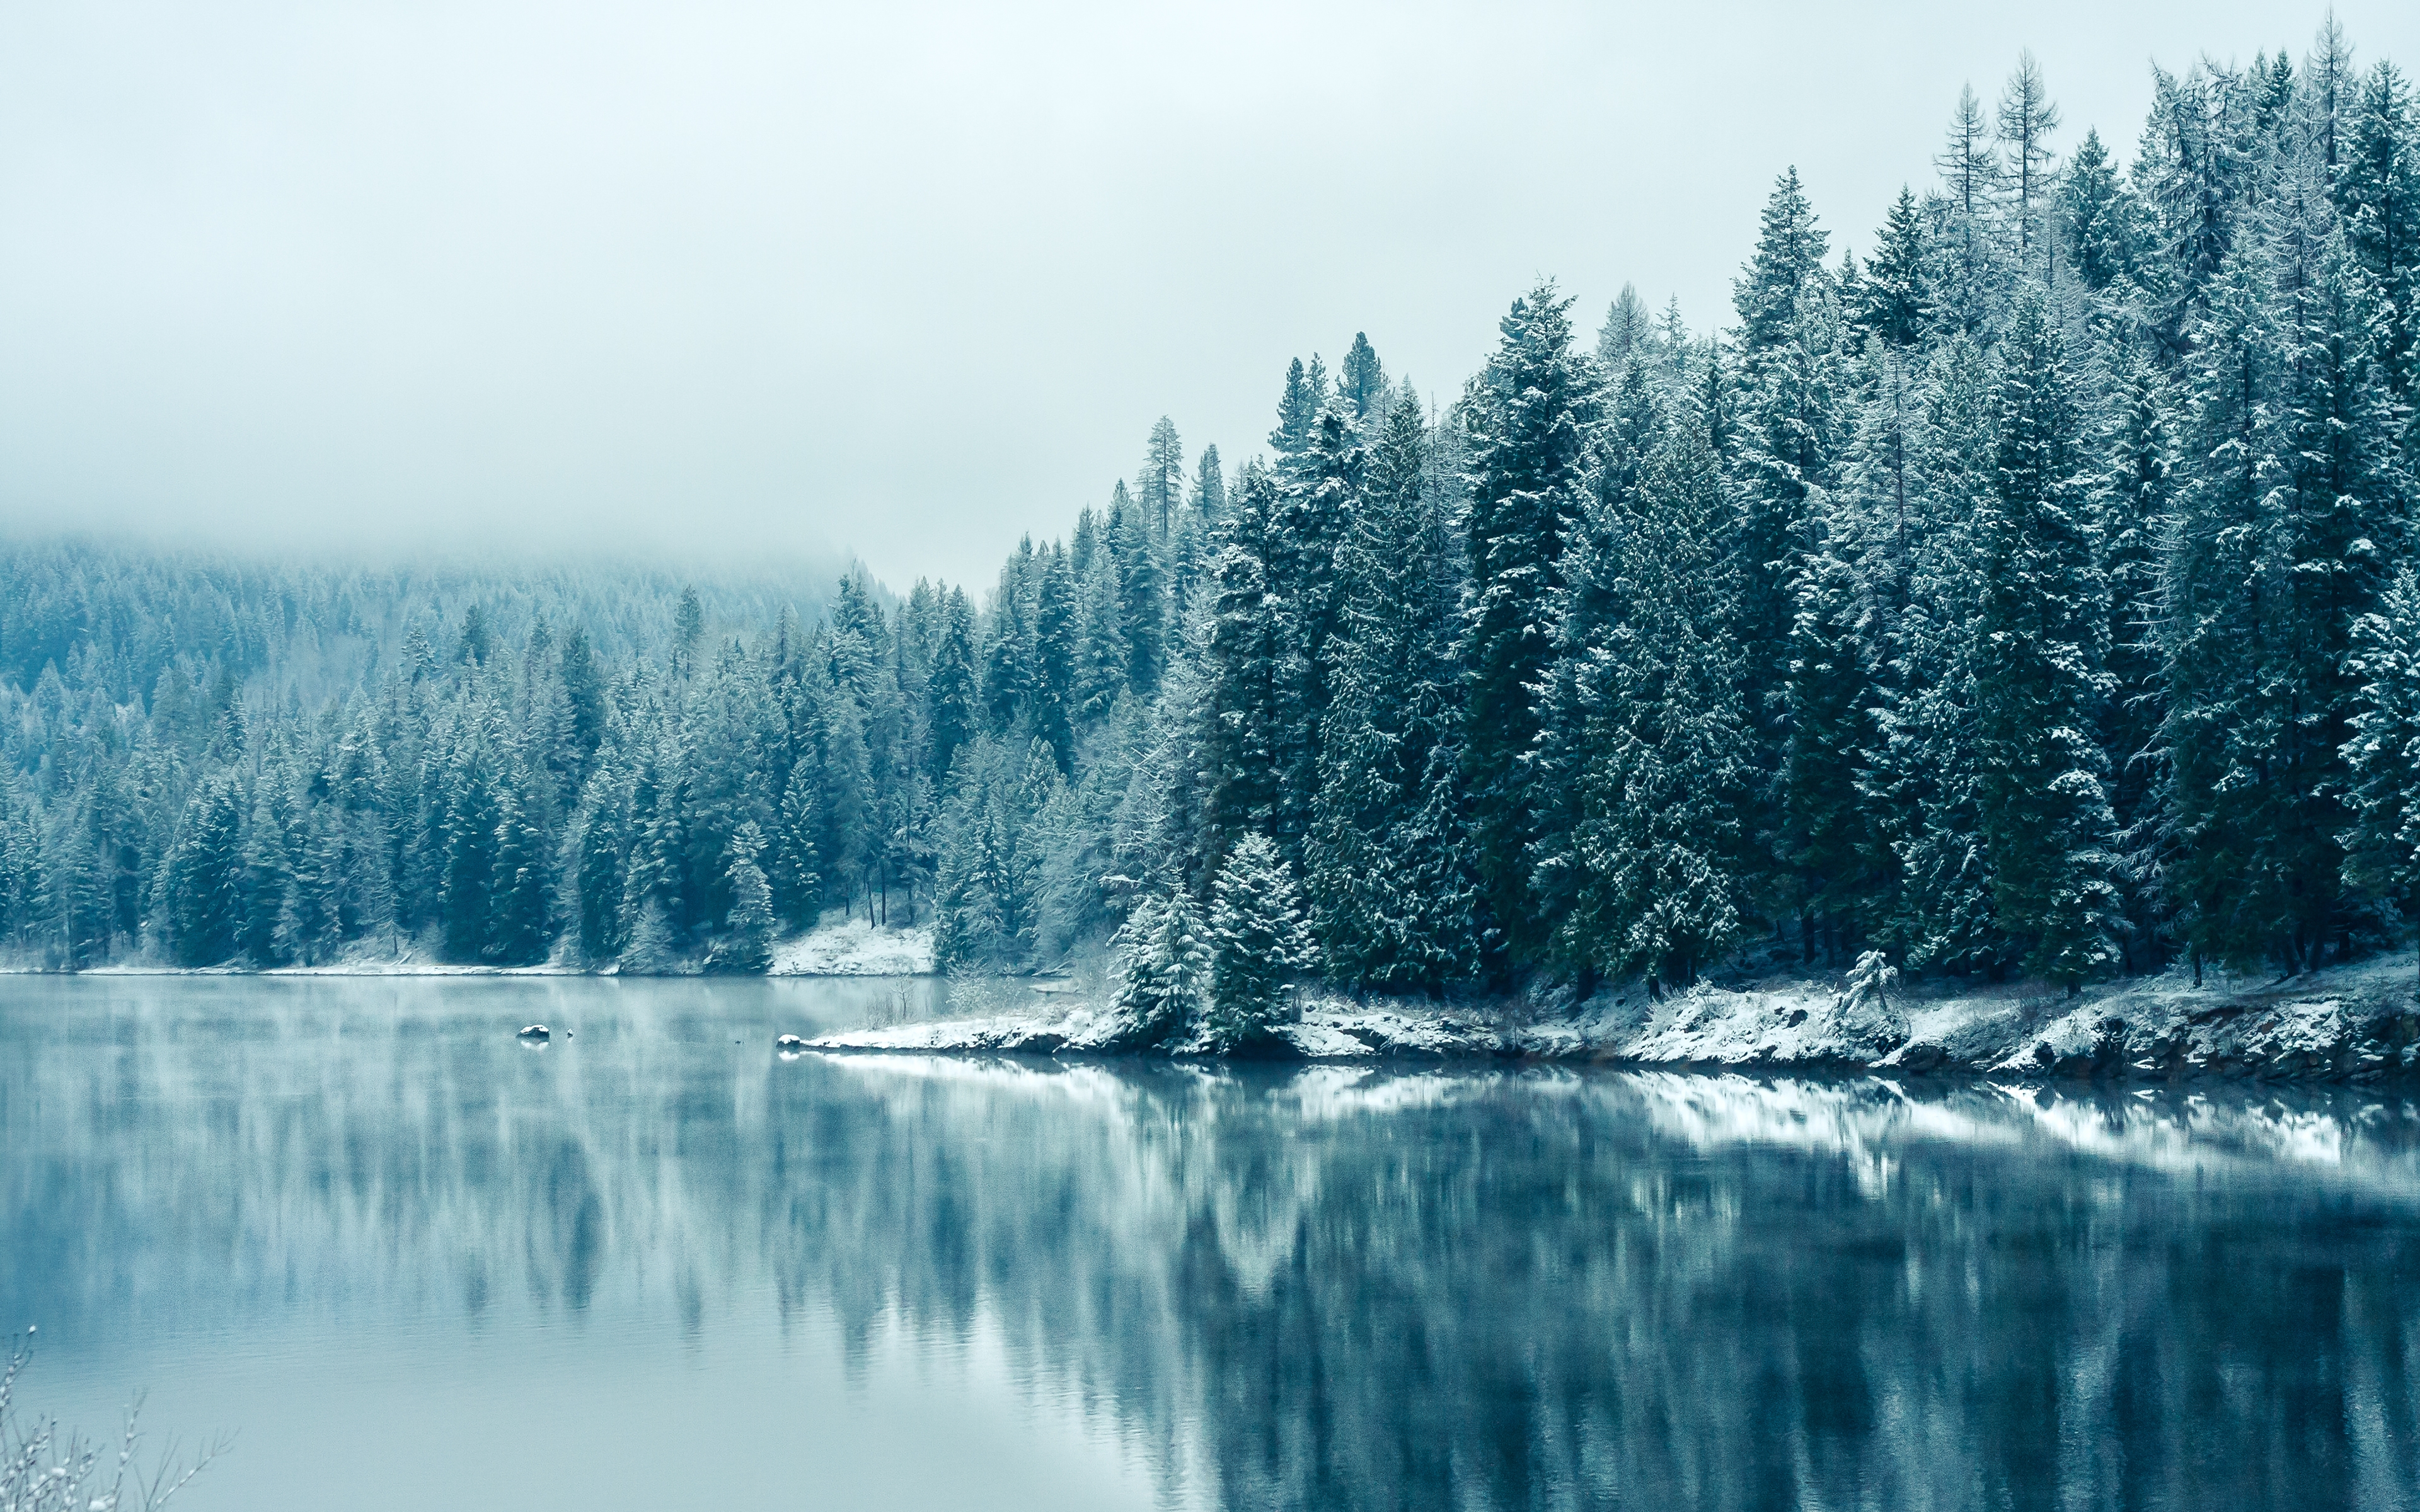 HD wallpaper, Canada, British Columbia, Winter, Landscape, Mirror Lake, Forest, Snowy Trees, Early Morning, Misty, Snowfall, Reflection, Kootenay River